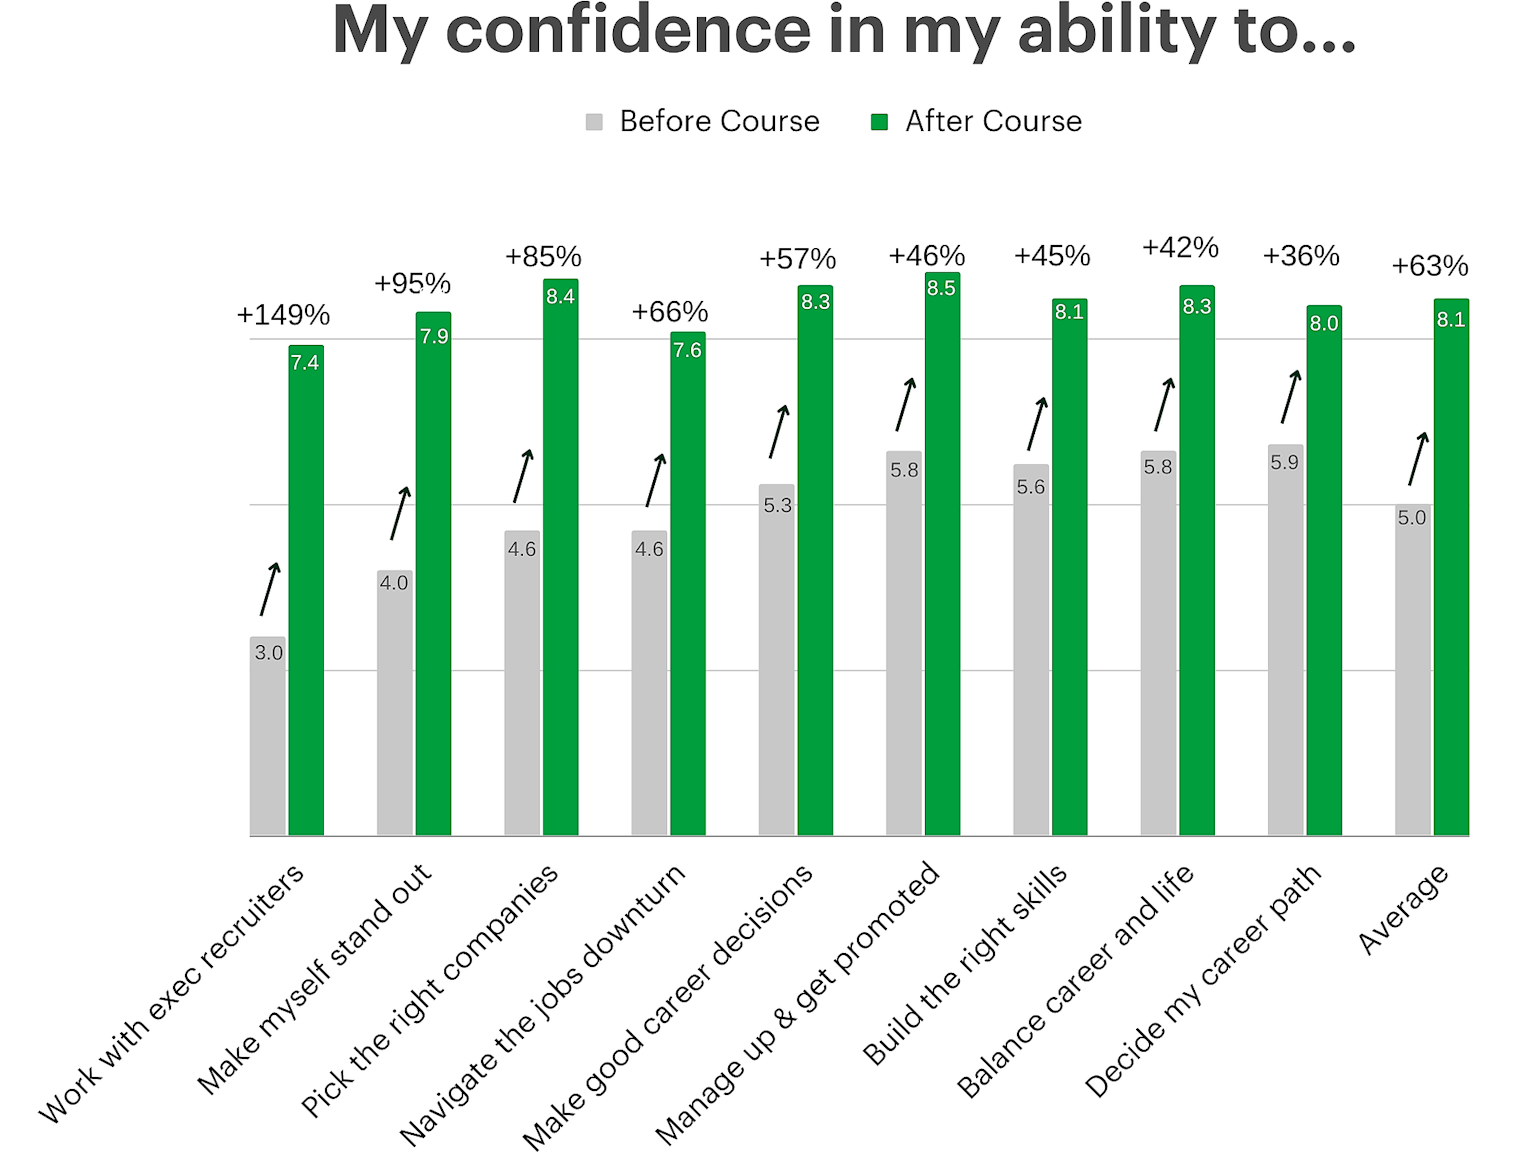 Note the substantial change in students' competence in these areas after taking the course.